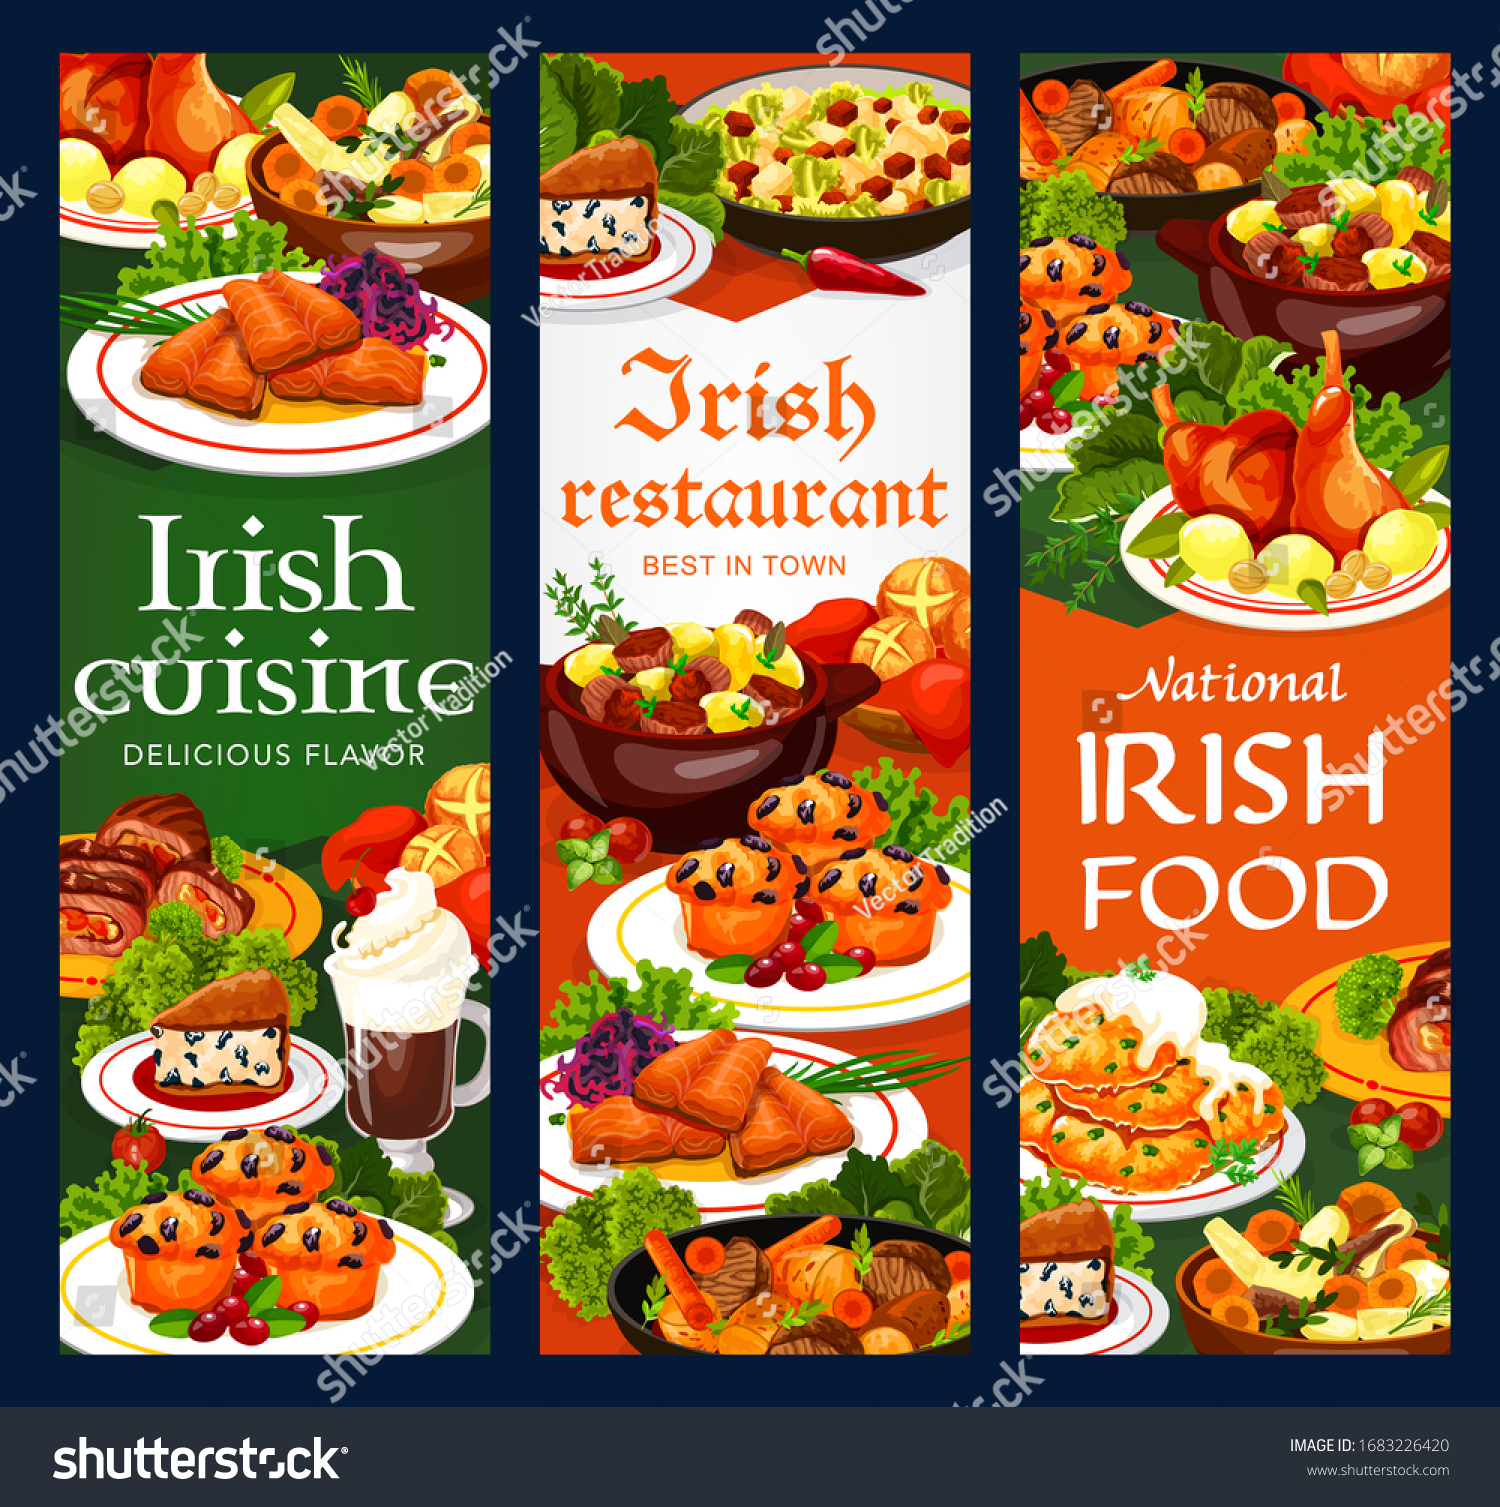 SVG of Irish cuisine vegetable meat stew, fish and soda bread, food vector banners. Potato pancakes, cabbage salad and grilled salmon, lamb, beef and rabbit stews, lingonberry cupcakes and colcannon svg